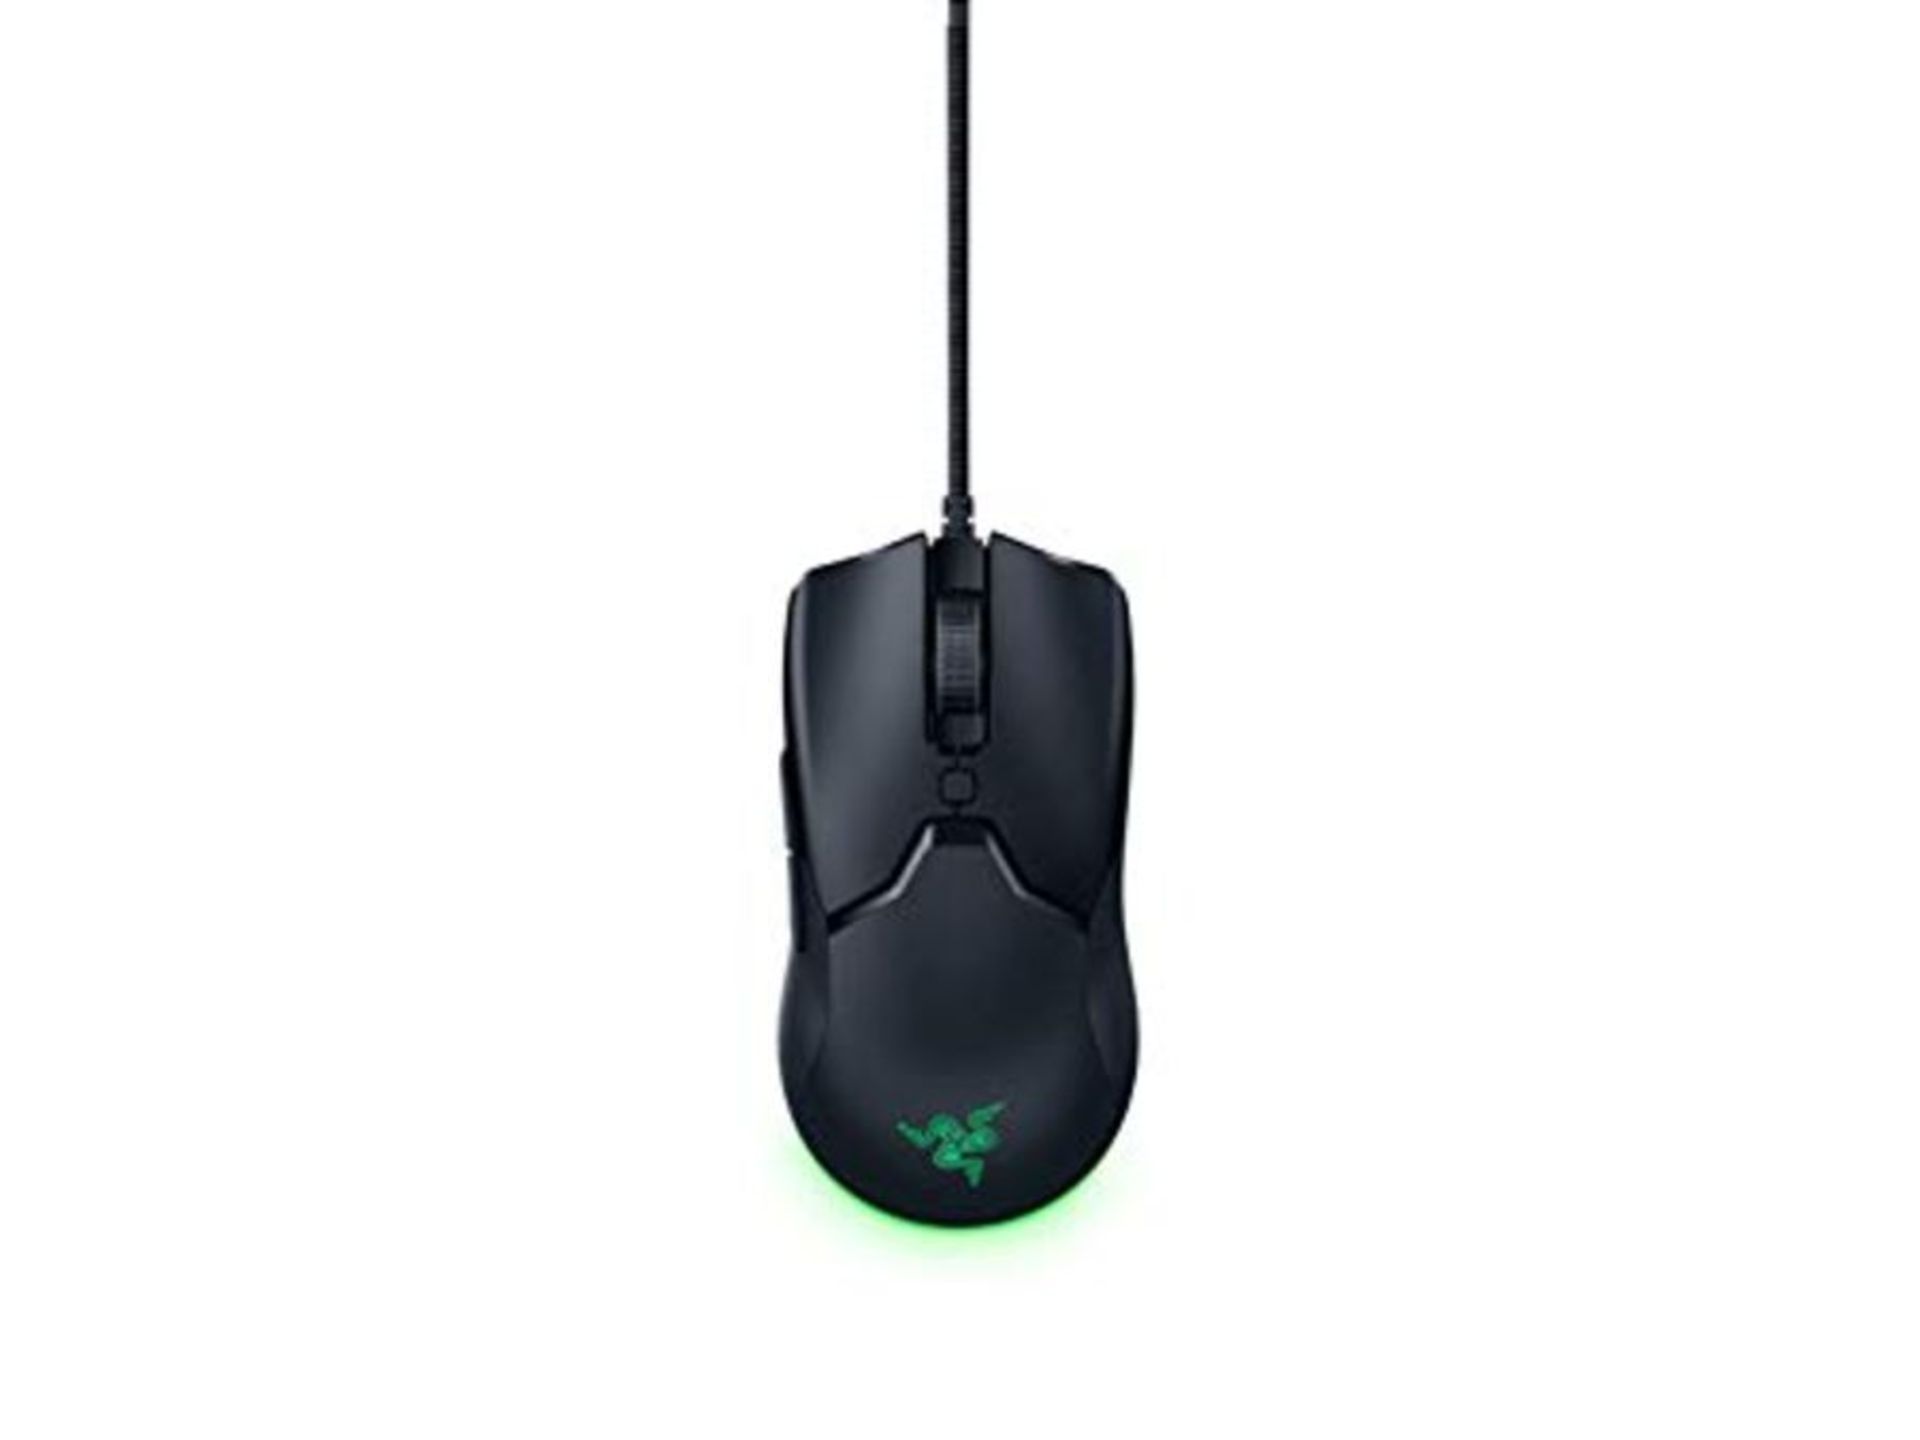 Razer Viper Mini - Wired Gaming Mouse weighing only 61g for PC / Mac (Ultralight, Ambi